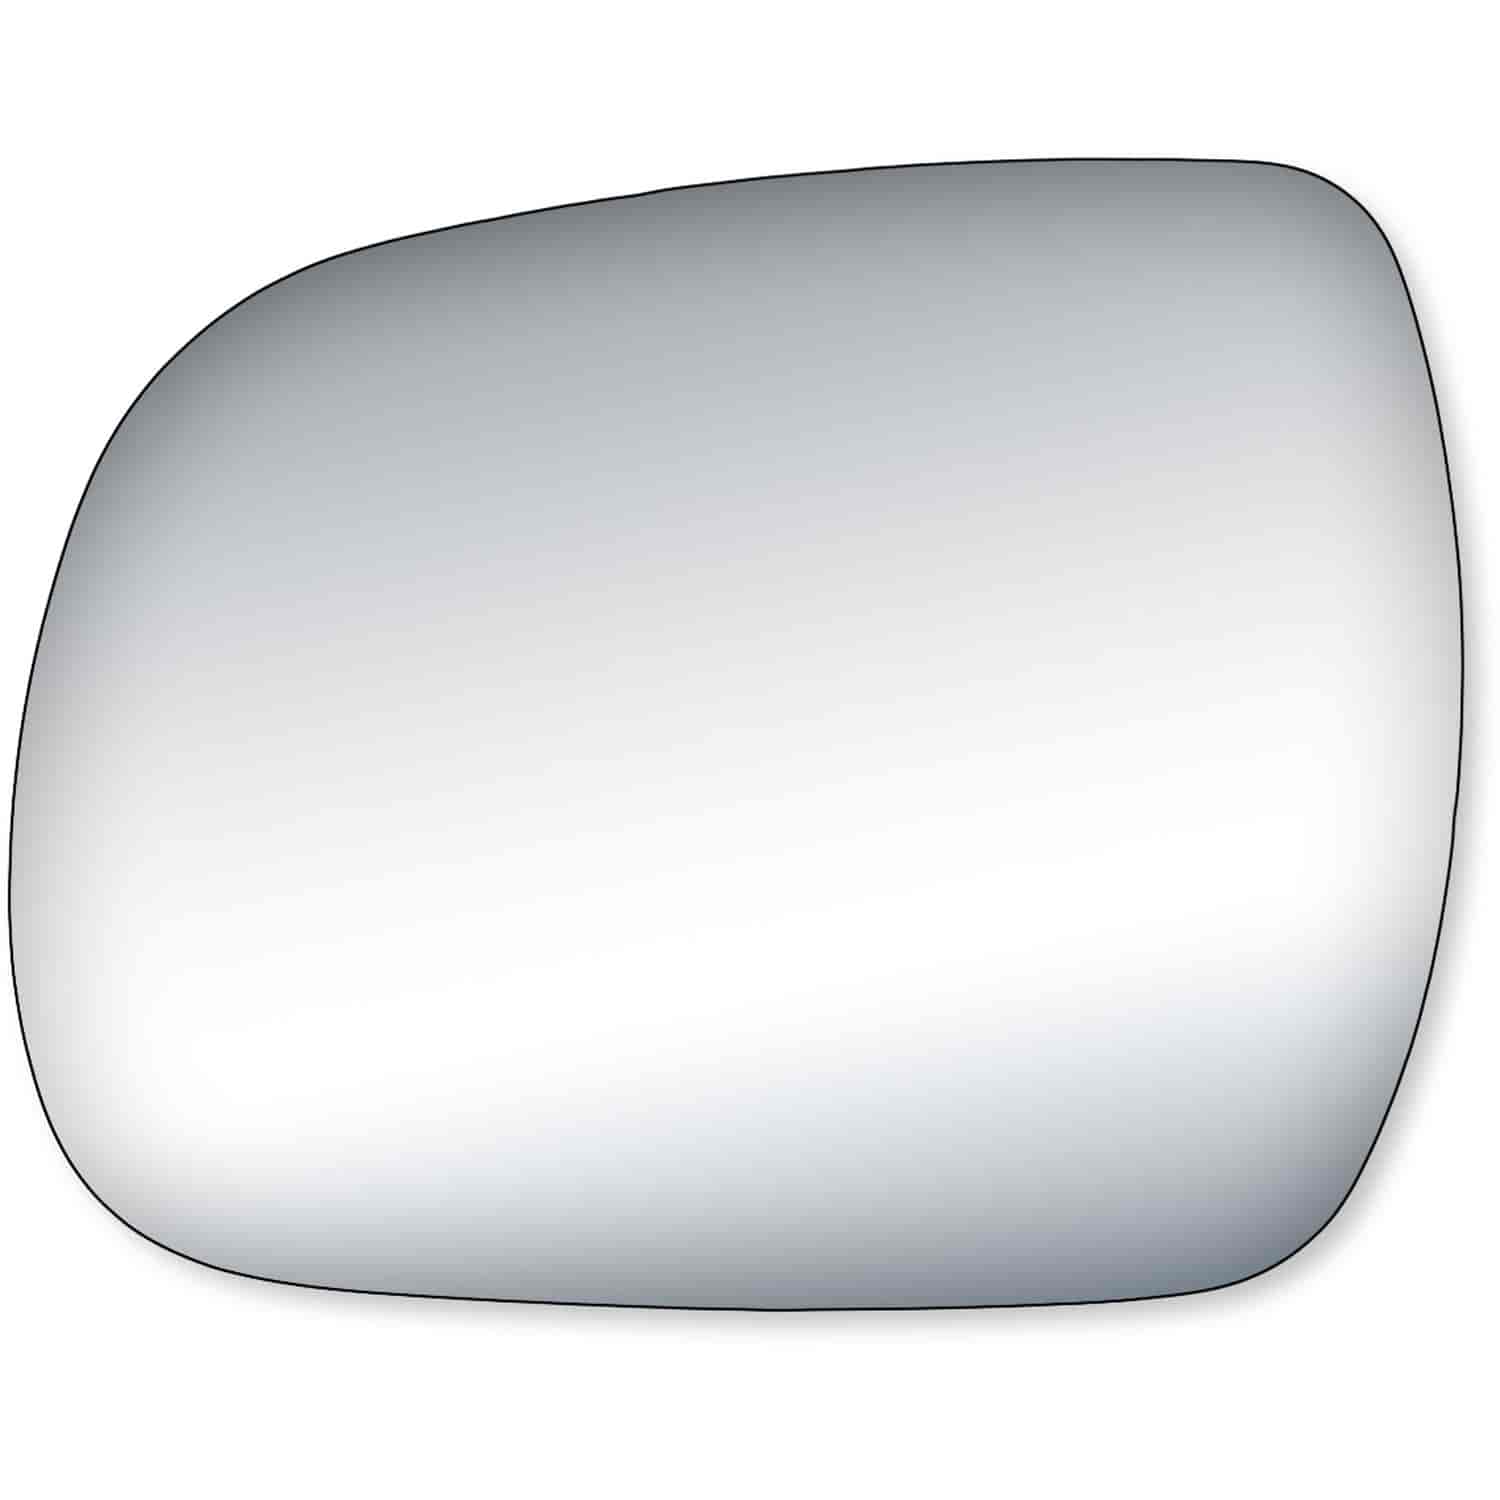 Replacement Glass for 05-11 Tacoma/ Crew Cab the glass measures 5 11/16 tall by 7 1/4 wide and 8 1/8